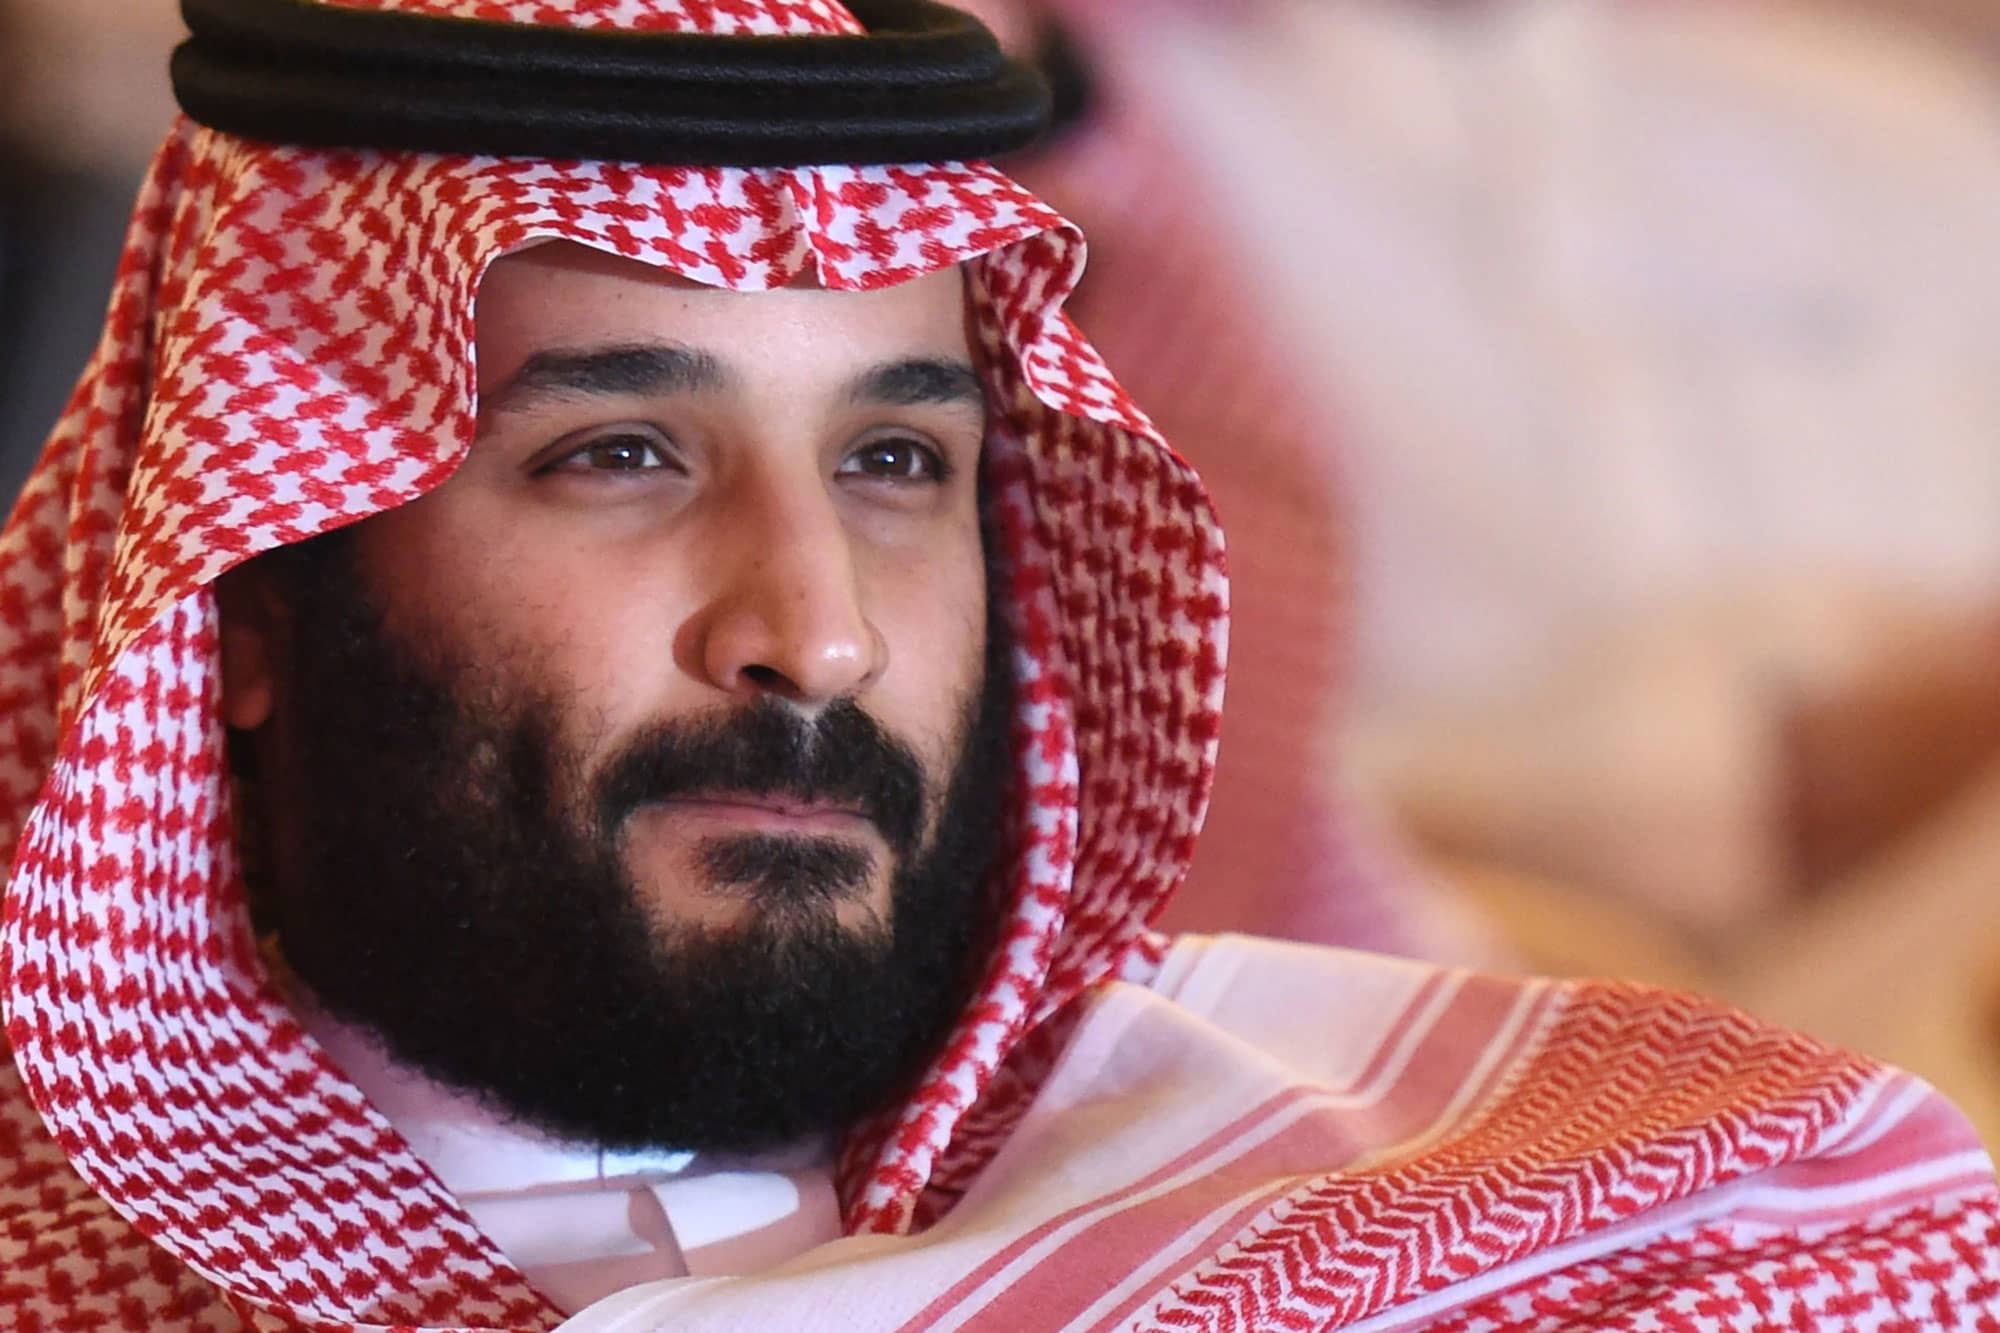 Crown prince's actions in Khashoggi killing leave Saudi fund vulnerable, ex-Obama official says - CNBC